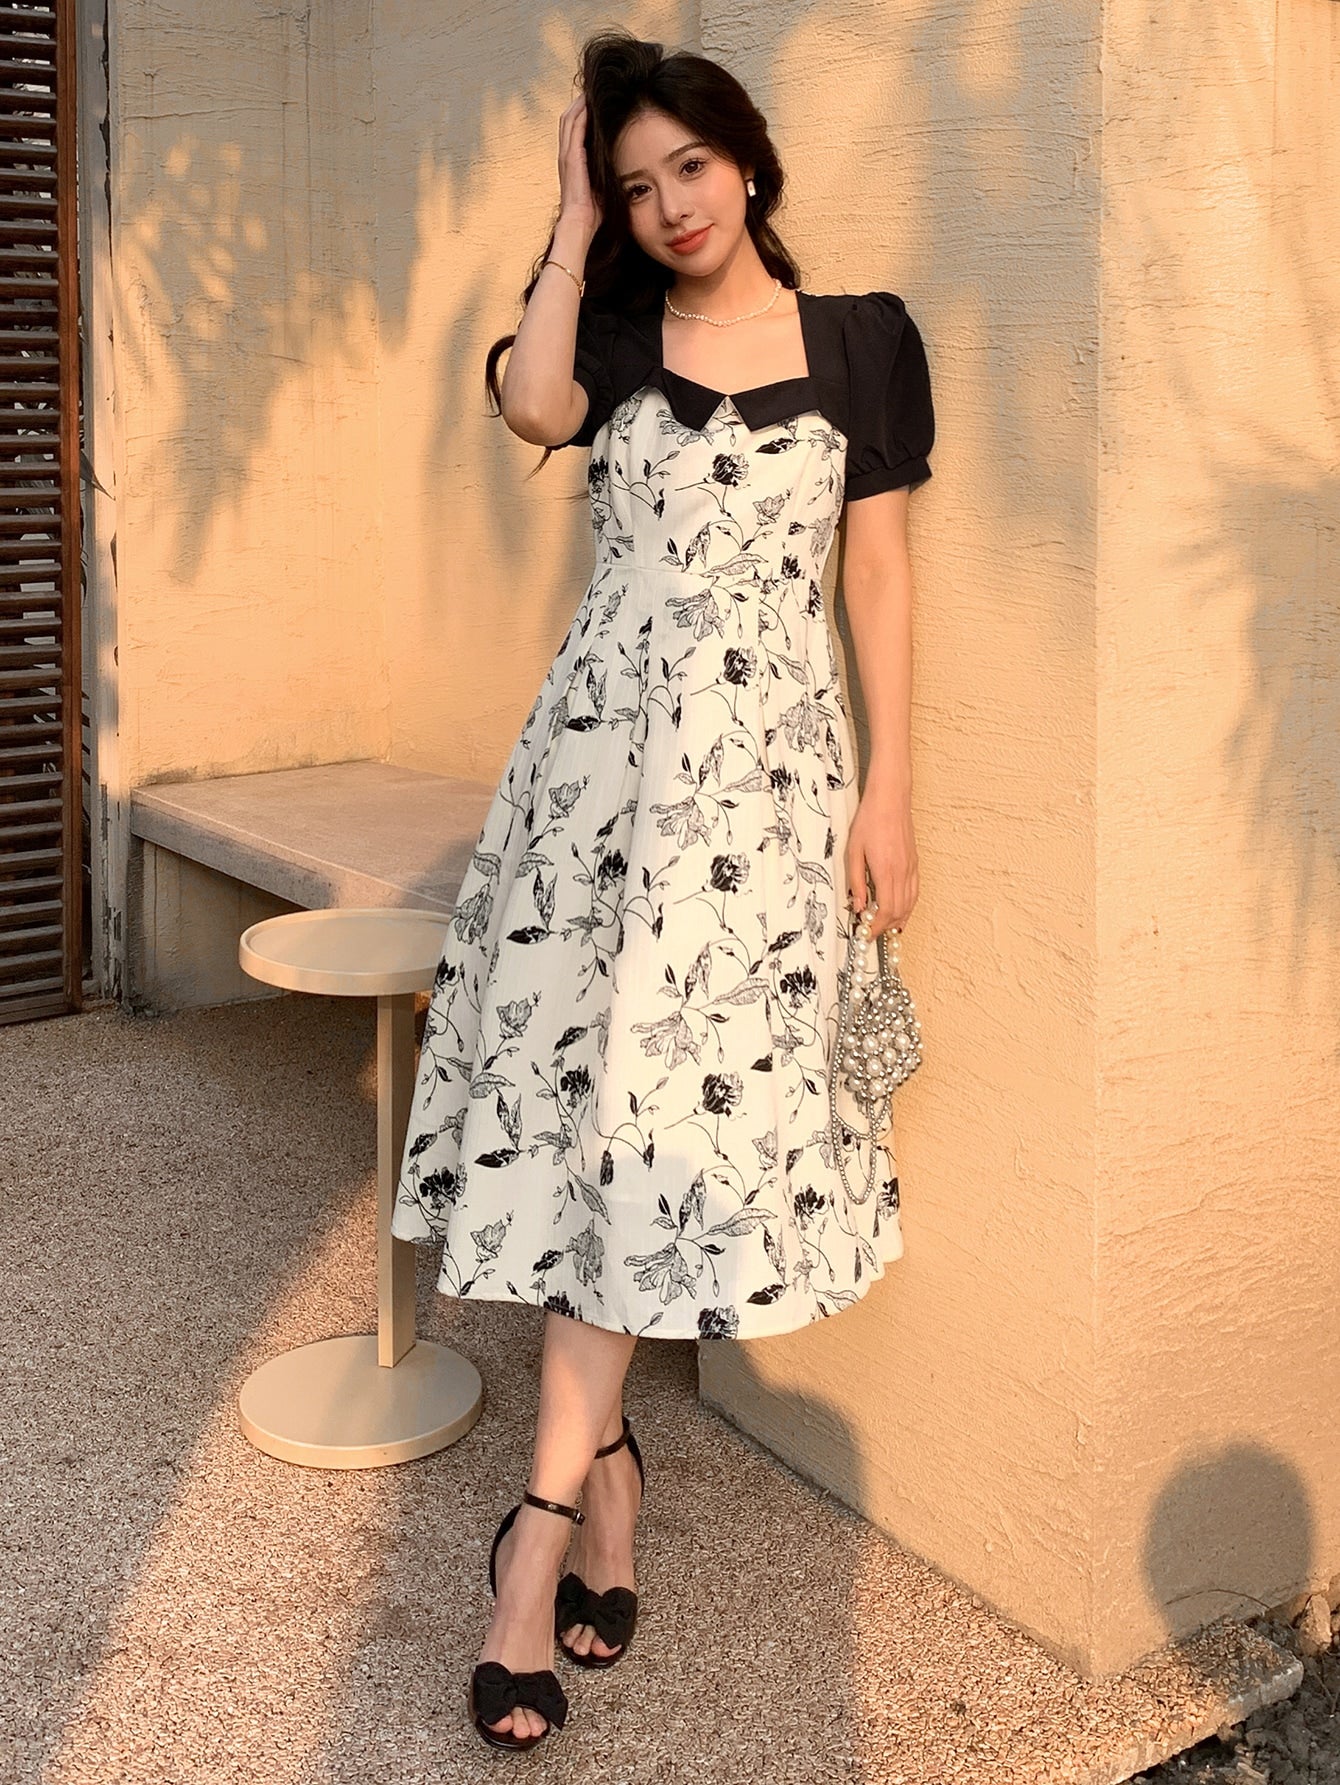 Floral Print Square Neck Puff Sleeve Dress